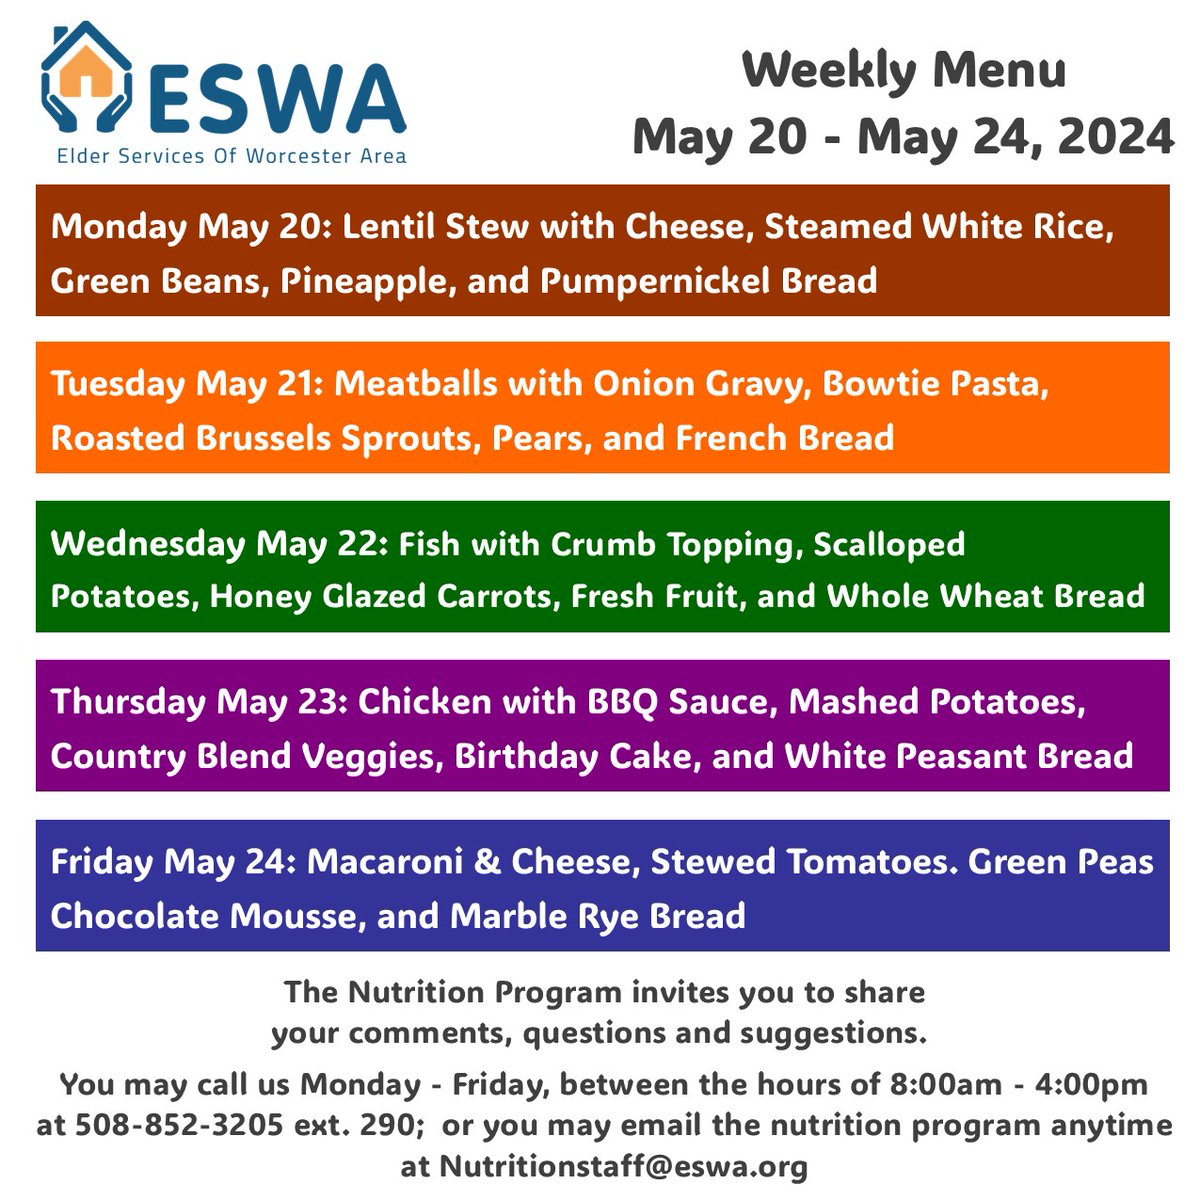 Here's the menu for this week, Monday, May 20 - Friday, May 24, 2024. What are you looking forward to eating?

Please note menu is subject to change. 
#MealsOnWheels #WorcesterMA #CentralMass